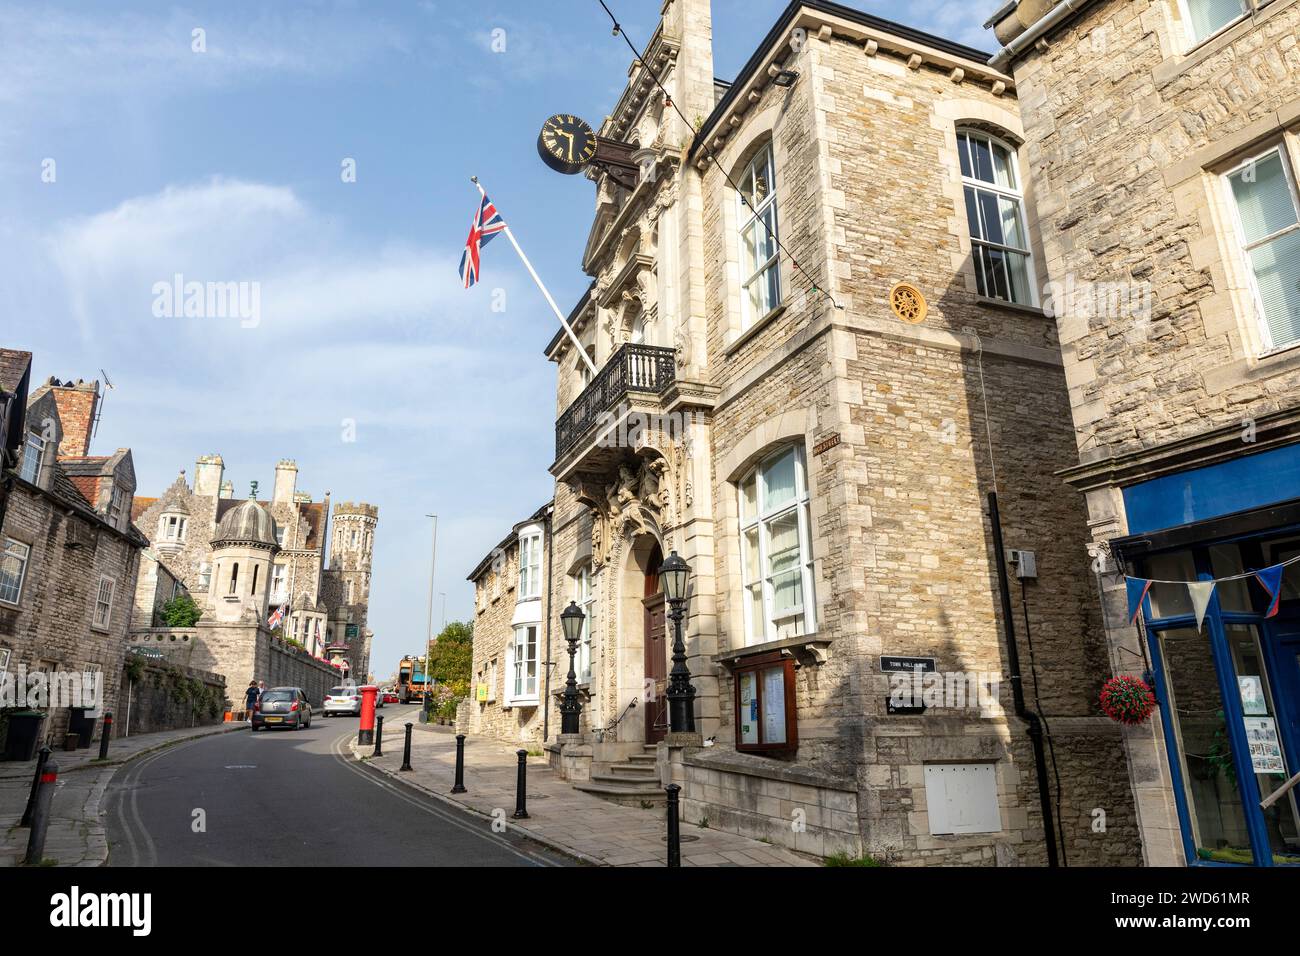 Swanage town in Dorset, town hall and council offices building in high street Swanage with Union Jack flying, England,UK,2023 Stock Photo